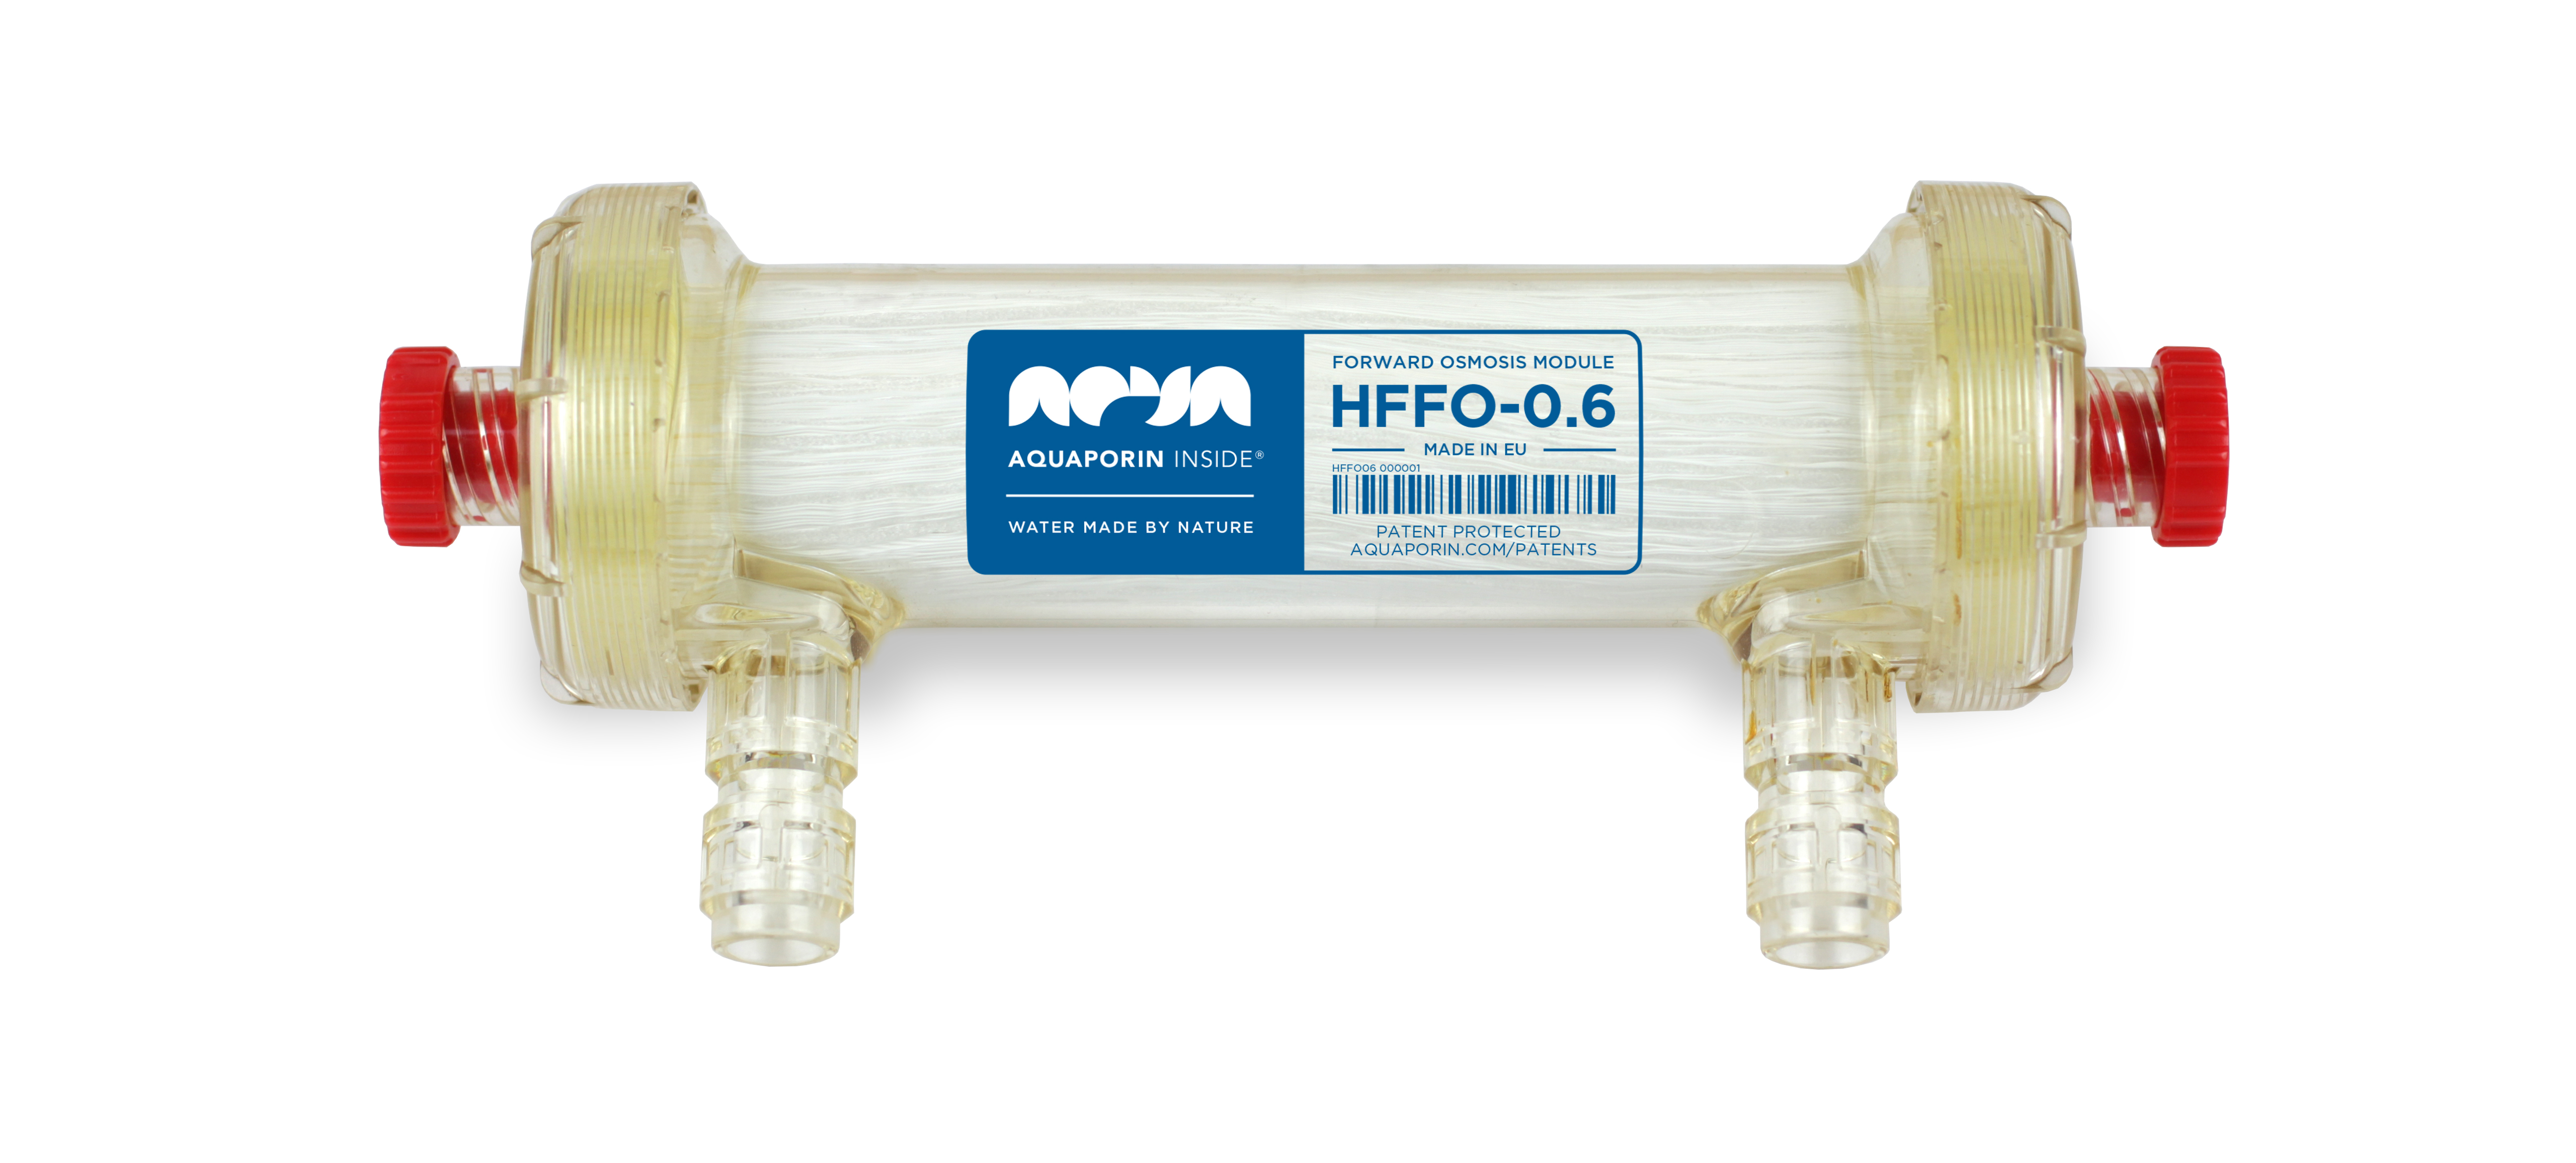 Aquaporin’s HFF0-0.6 FO module complements its larger HFFO2-220 module.